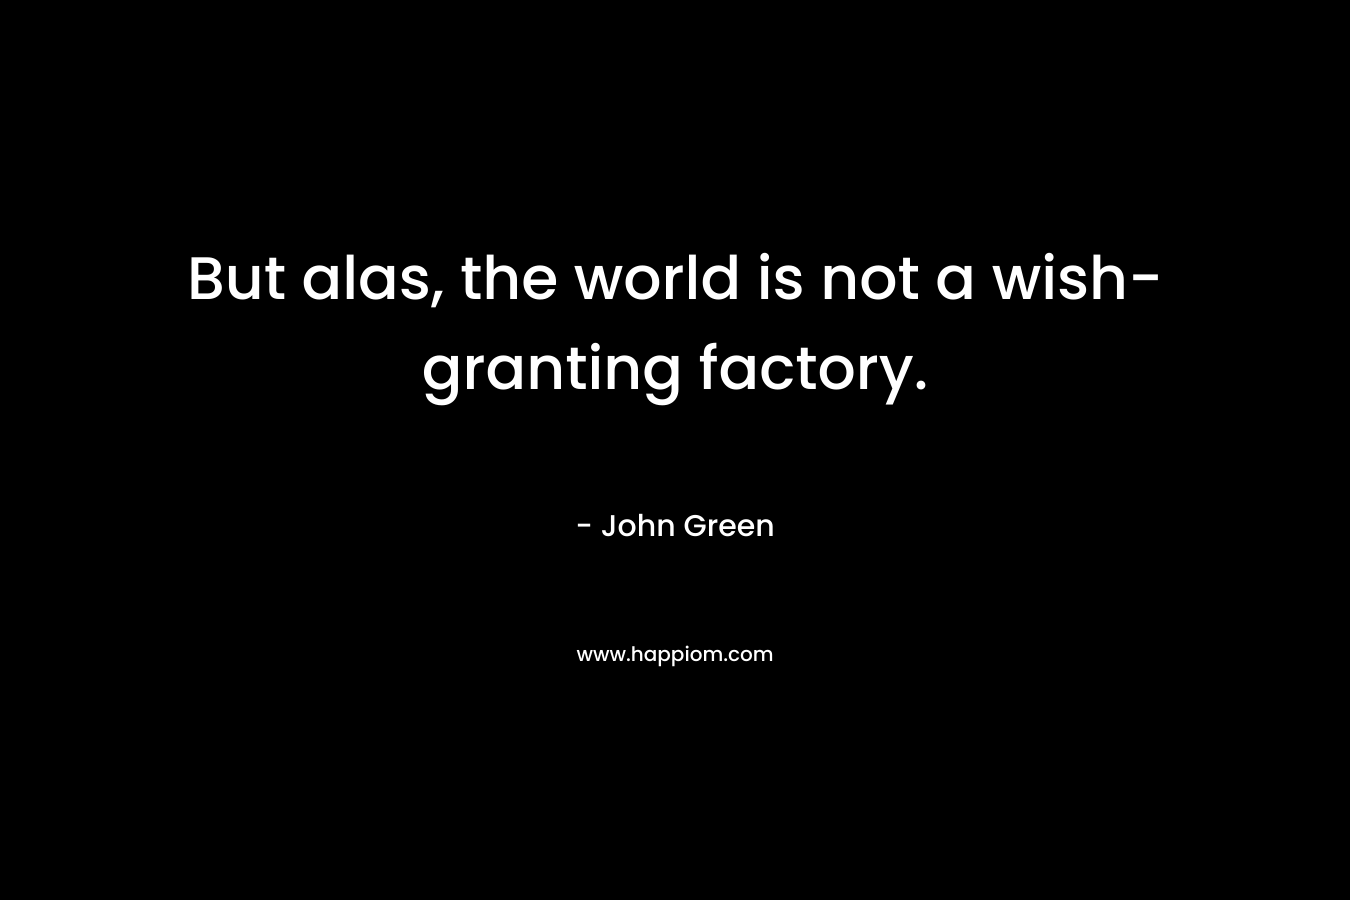 But alas, the world is not a wish-granting factory. – John Green